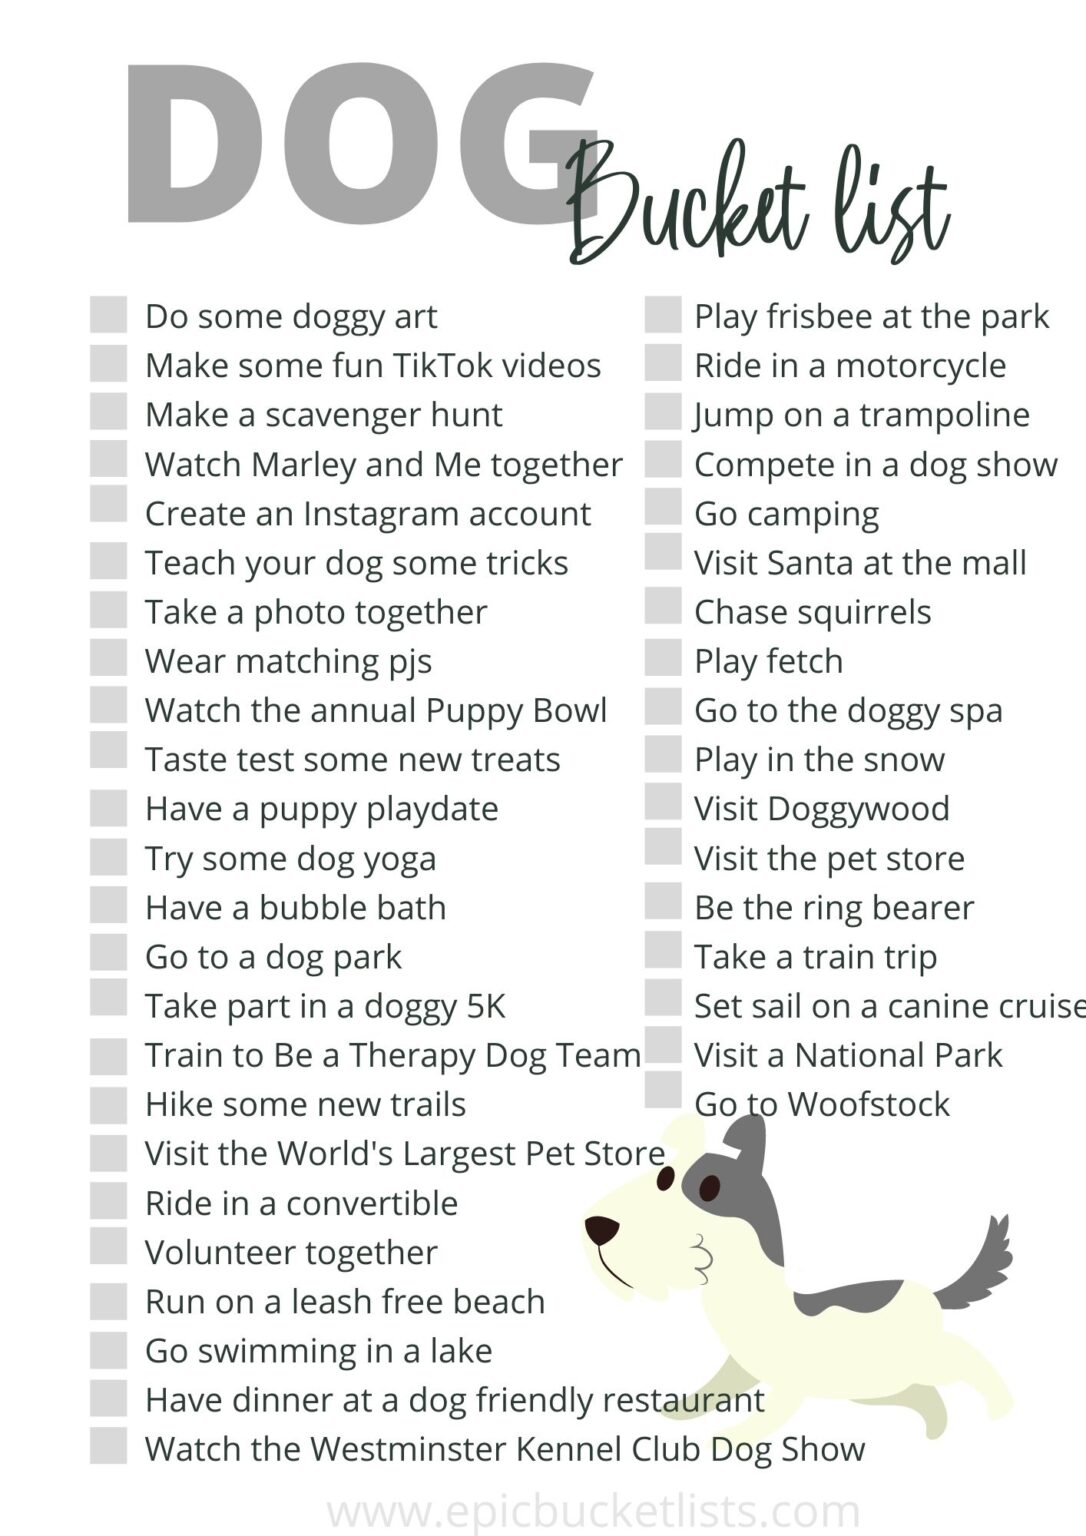 Dog Bucket List: 50 Fun Things To Do With Your Dog - Epic Bucket Lists